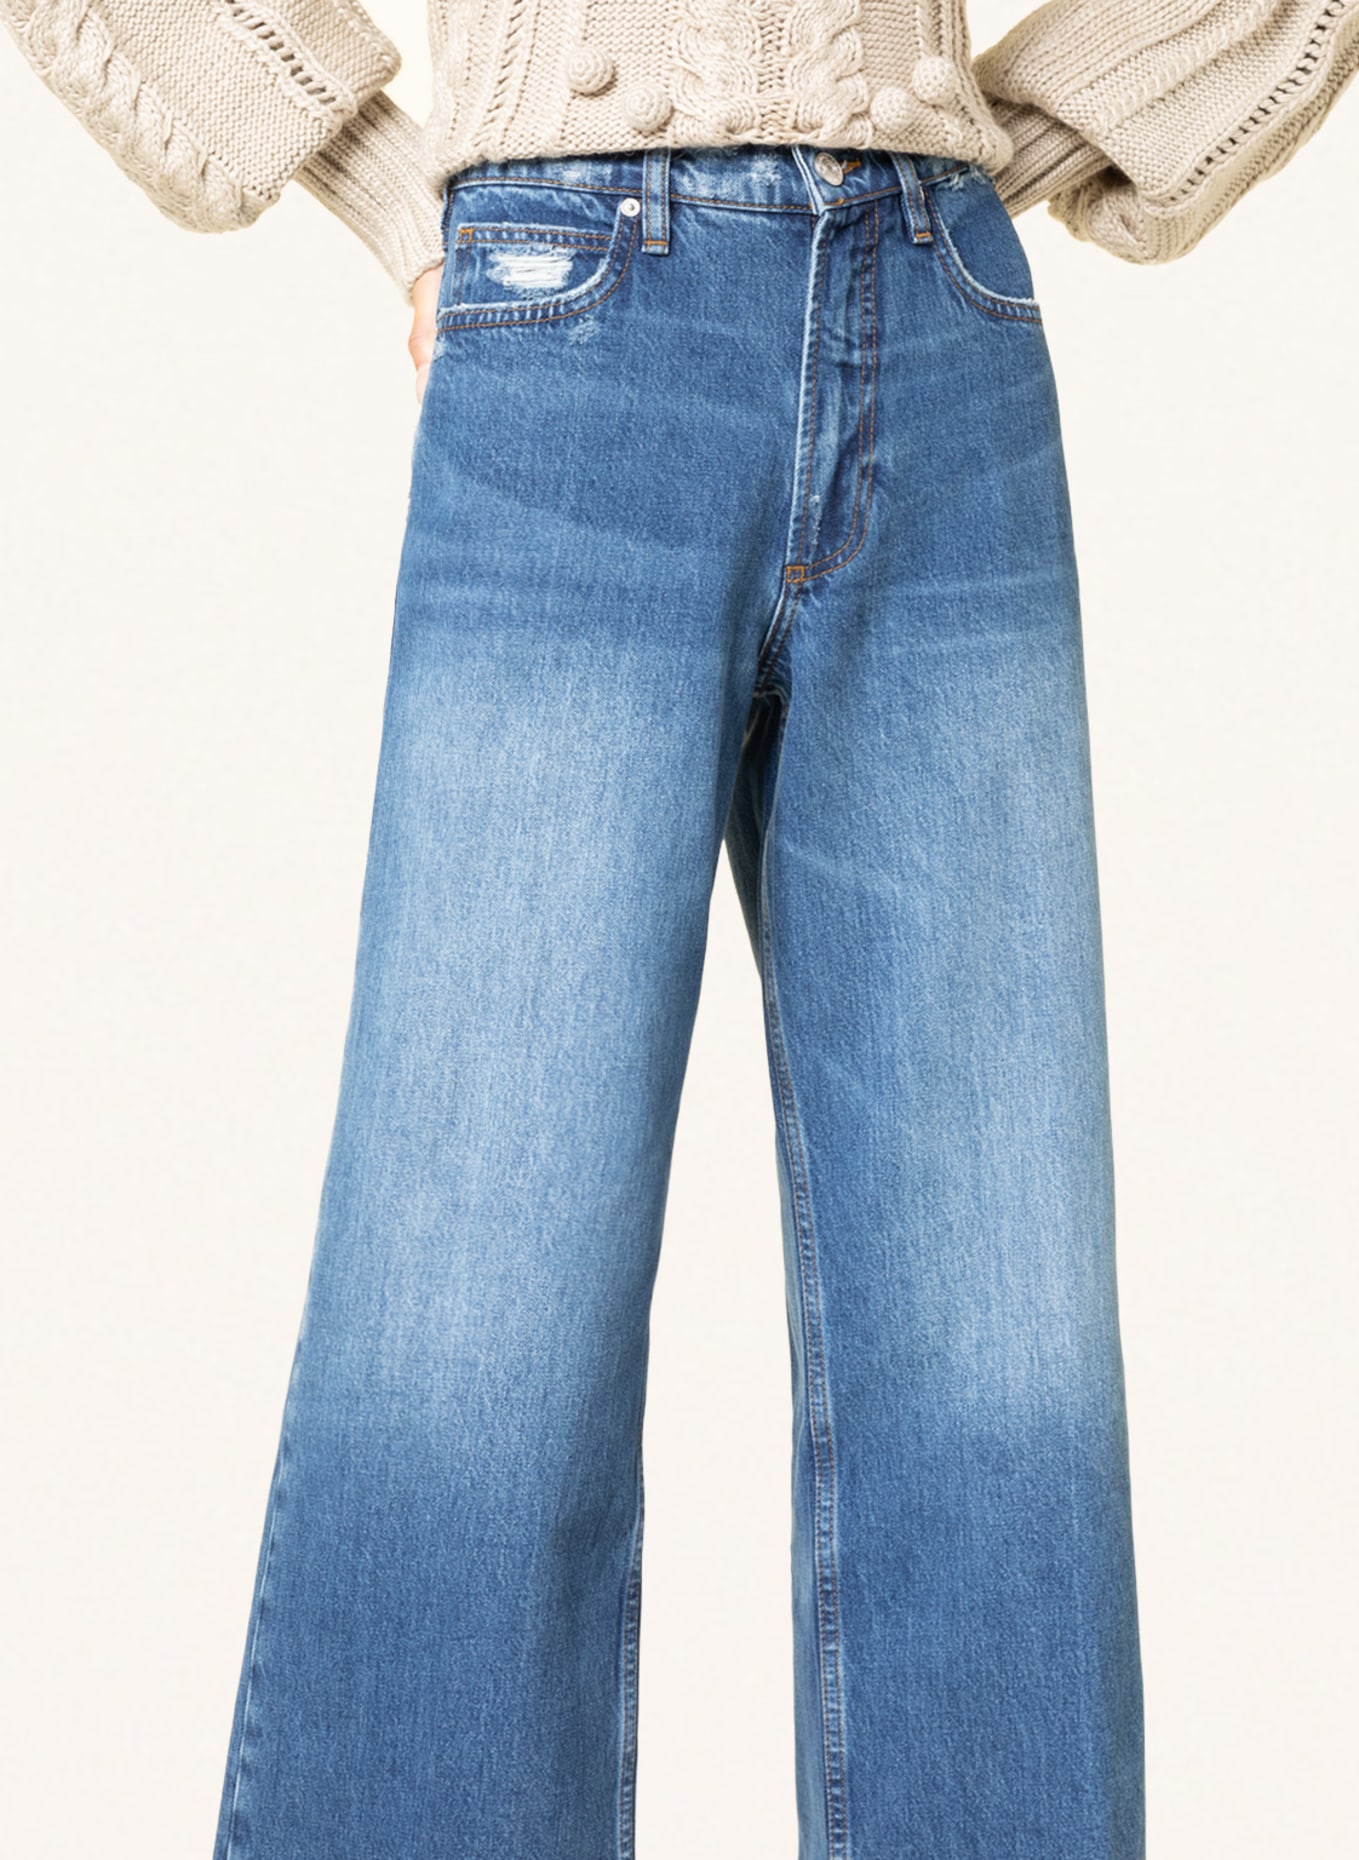 FRAME Jeans-Culotte LE PIXIE HIGH 'N' TIGHT, Farbe: STNL STEARNLEE (Bild 5)